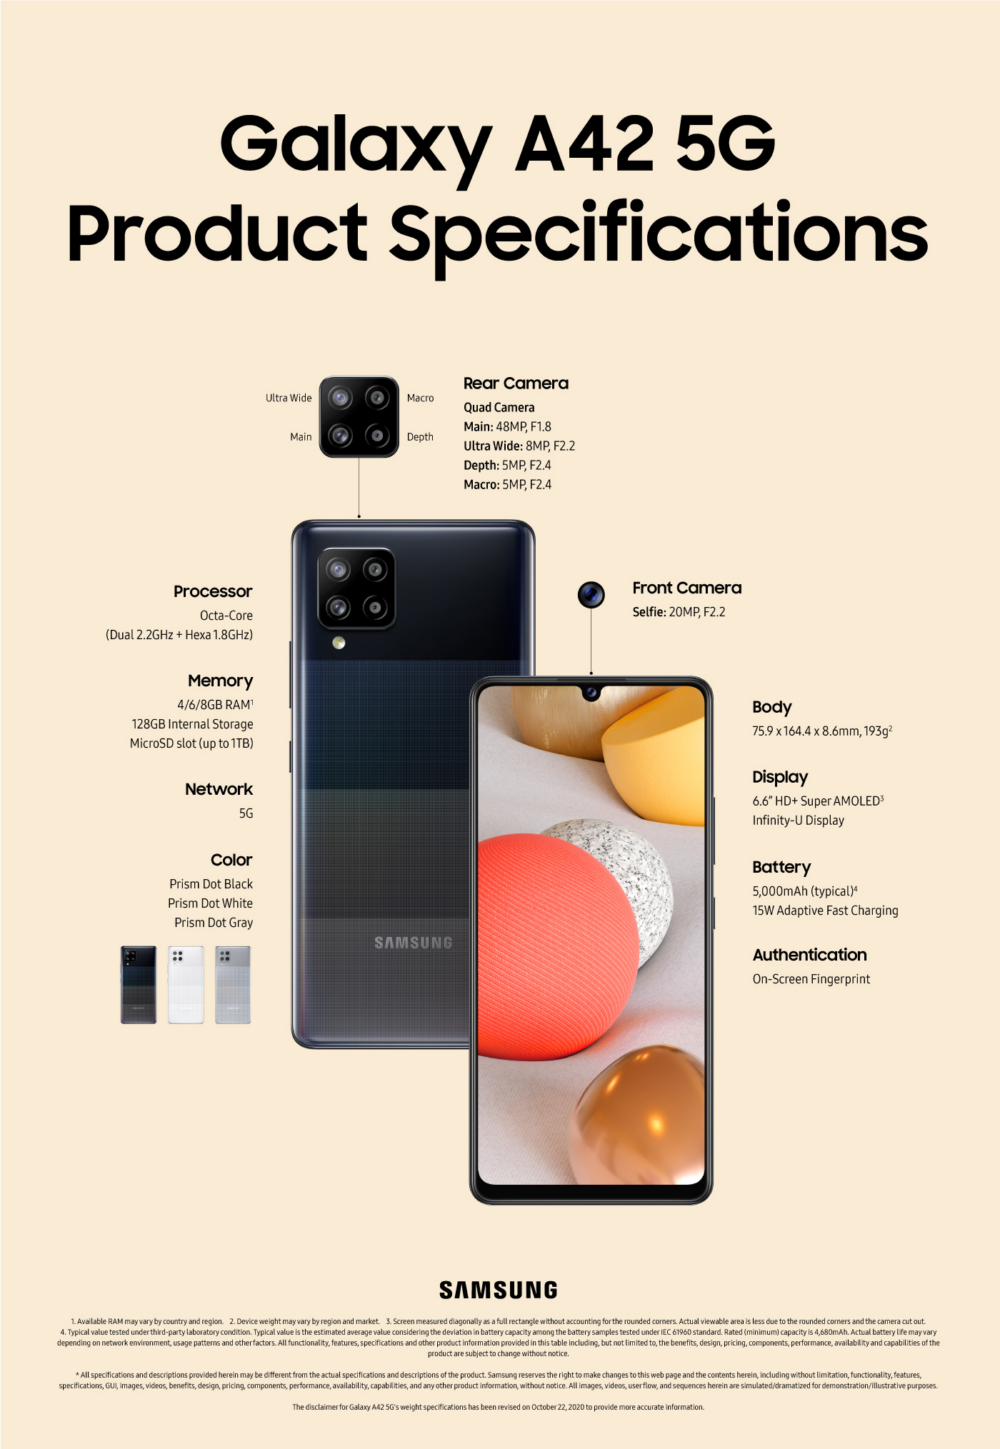 Galaxy_A42-5G_product_specifications.jpg